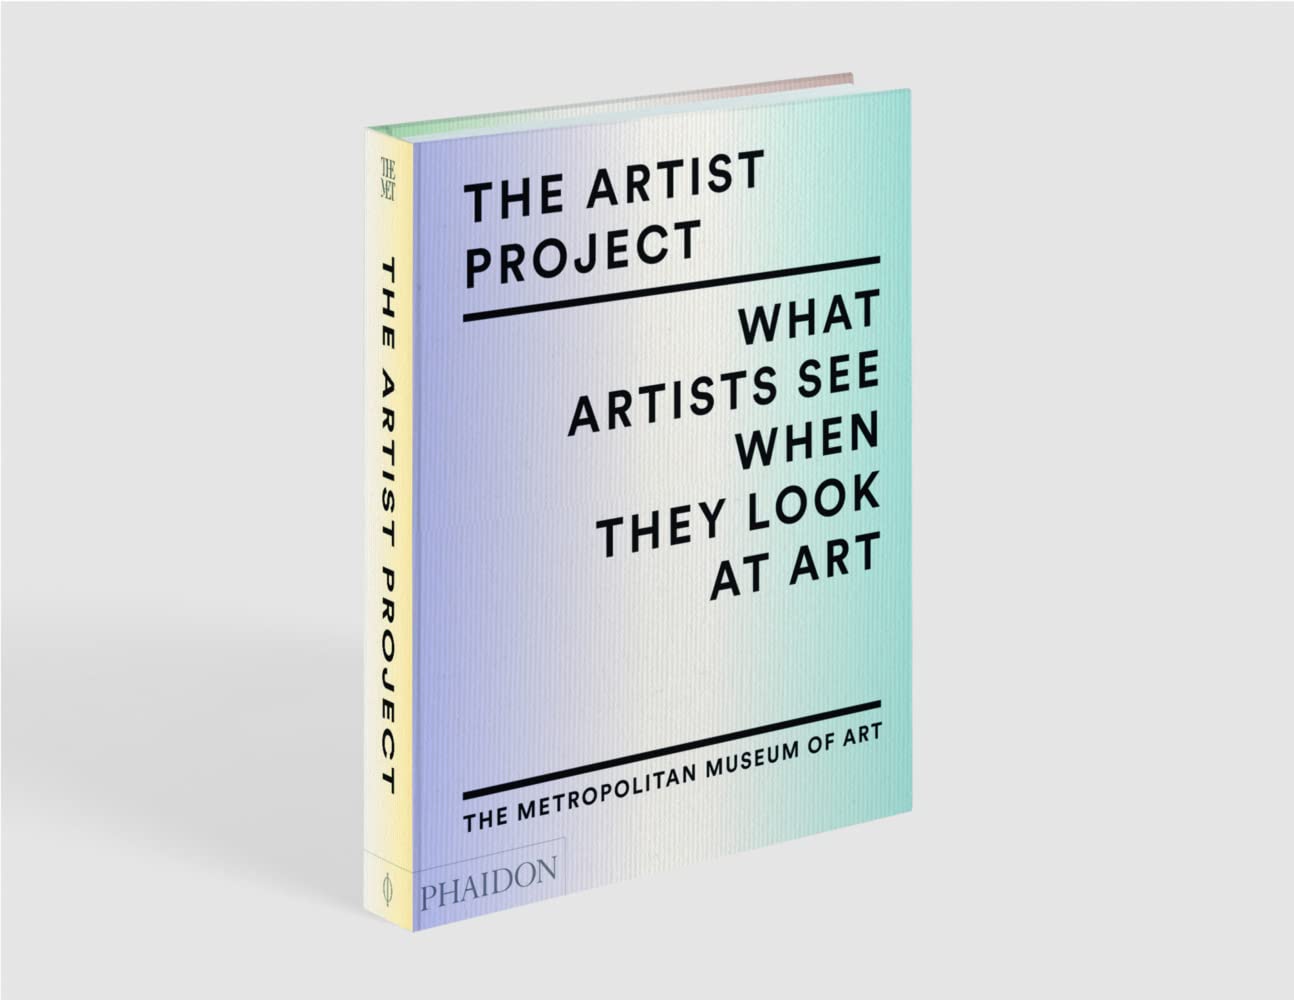 The Artist Project: What Artists See When They Look At Art